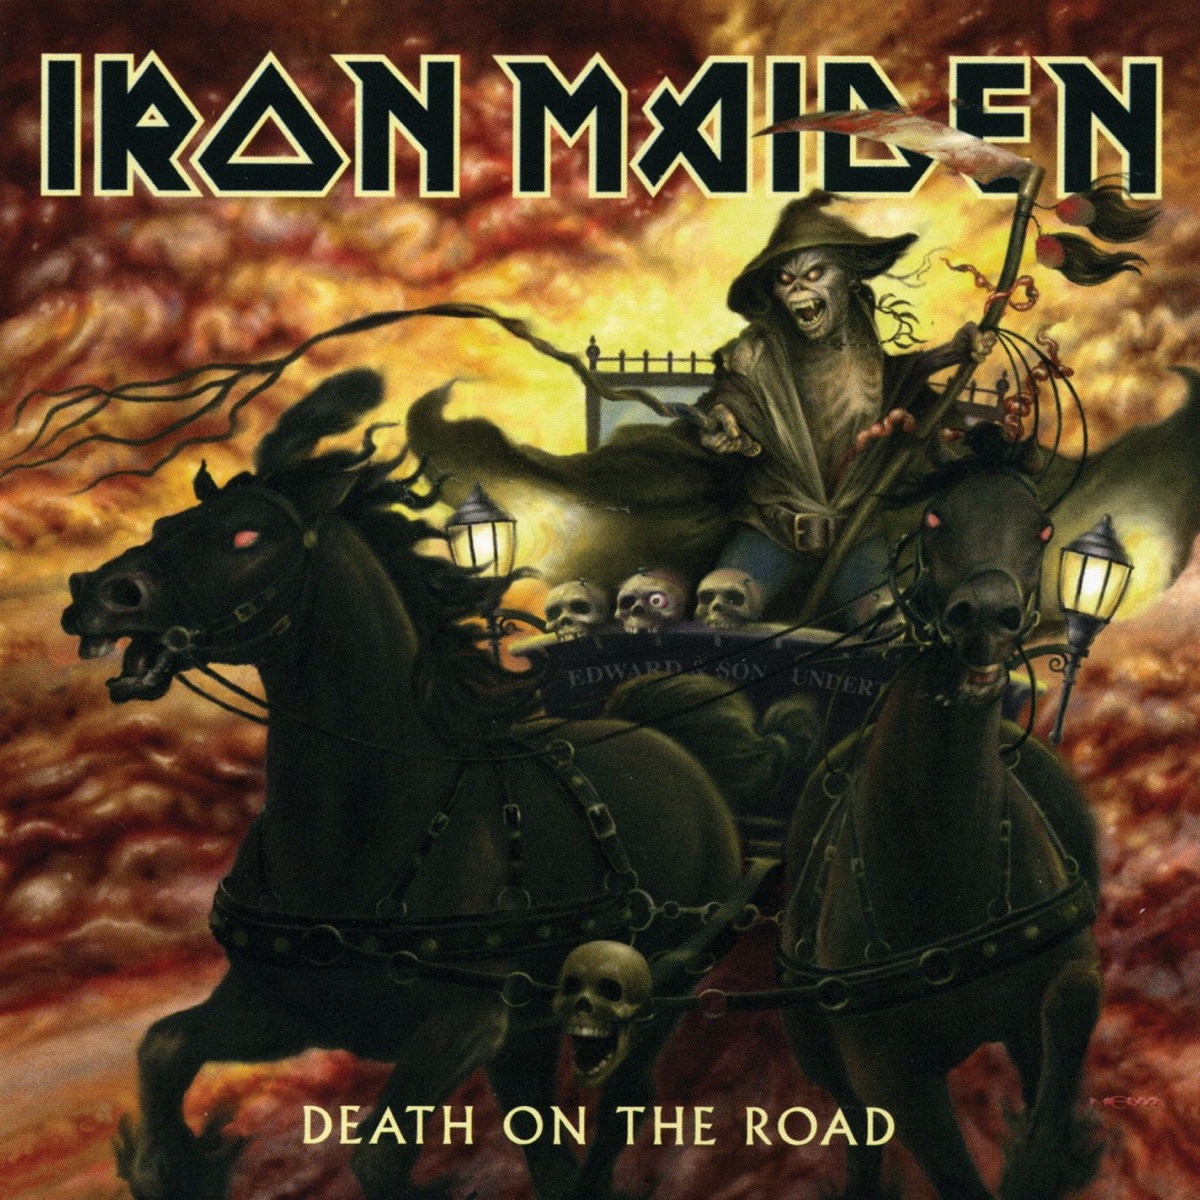 ‎Death on the Road - Album by Iron Maiden - Apple Music